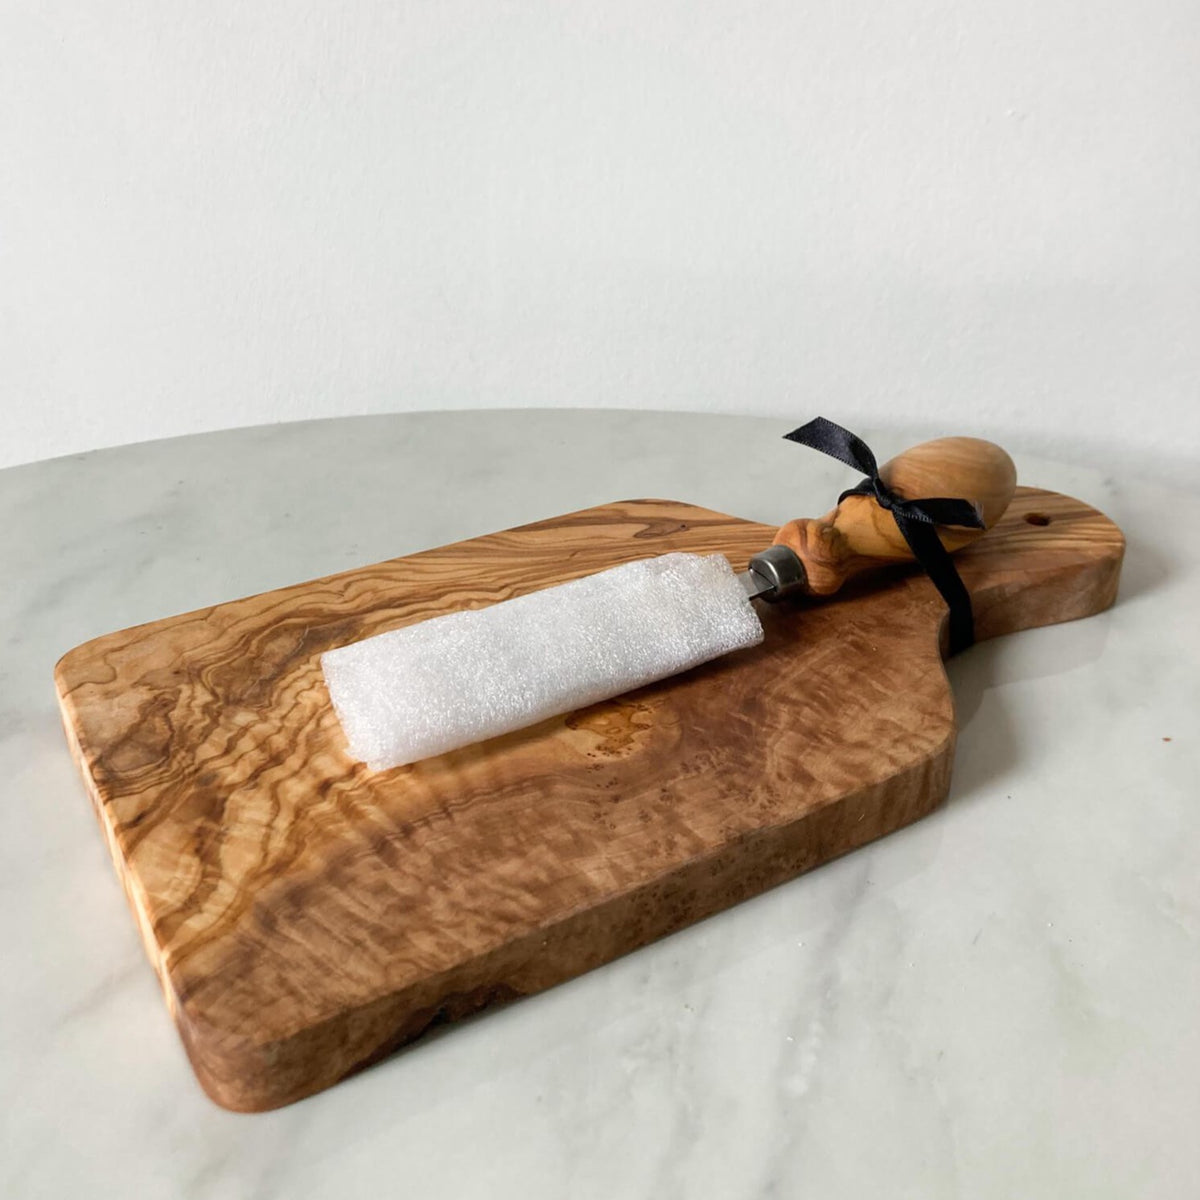 Wooden Cheeseboard and Knife Set